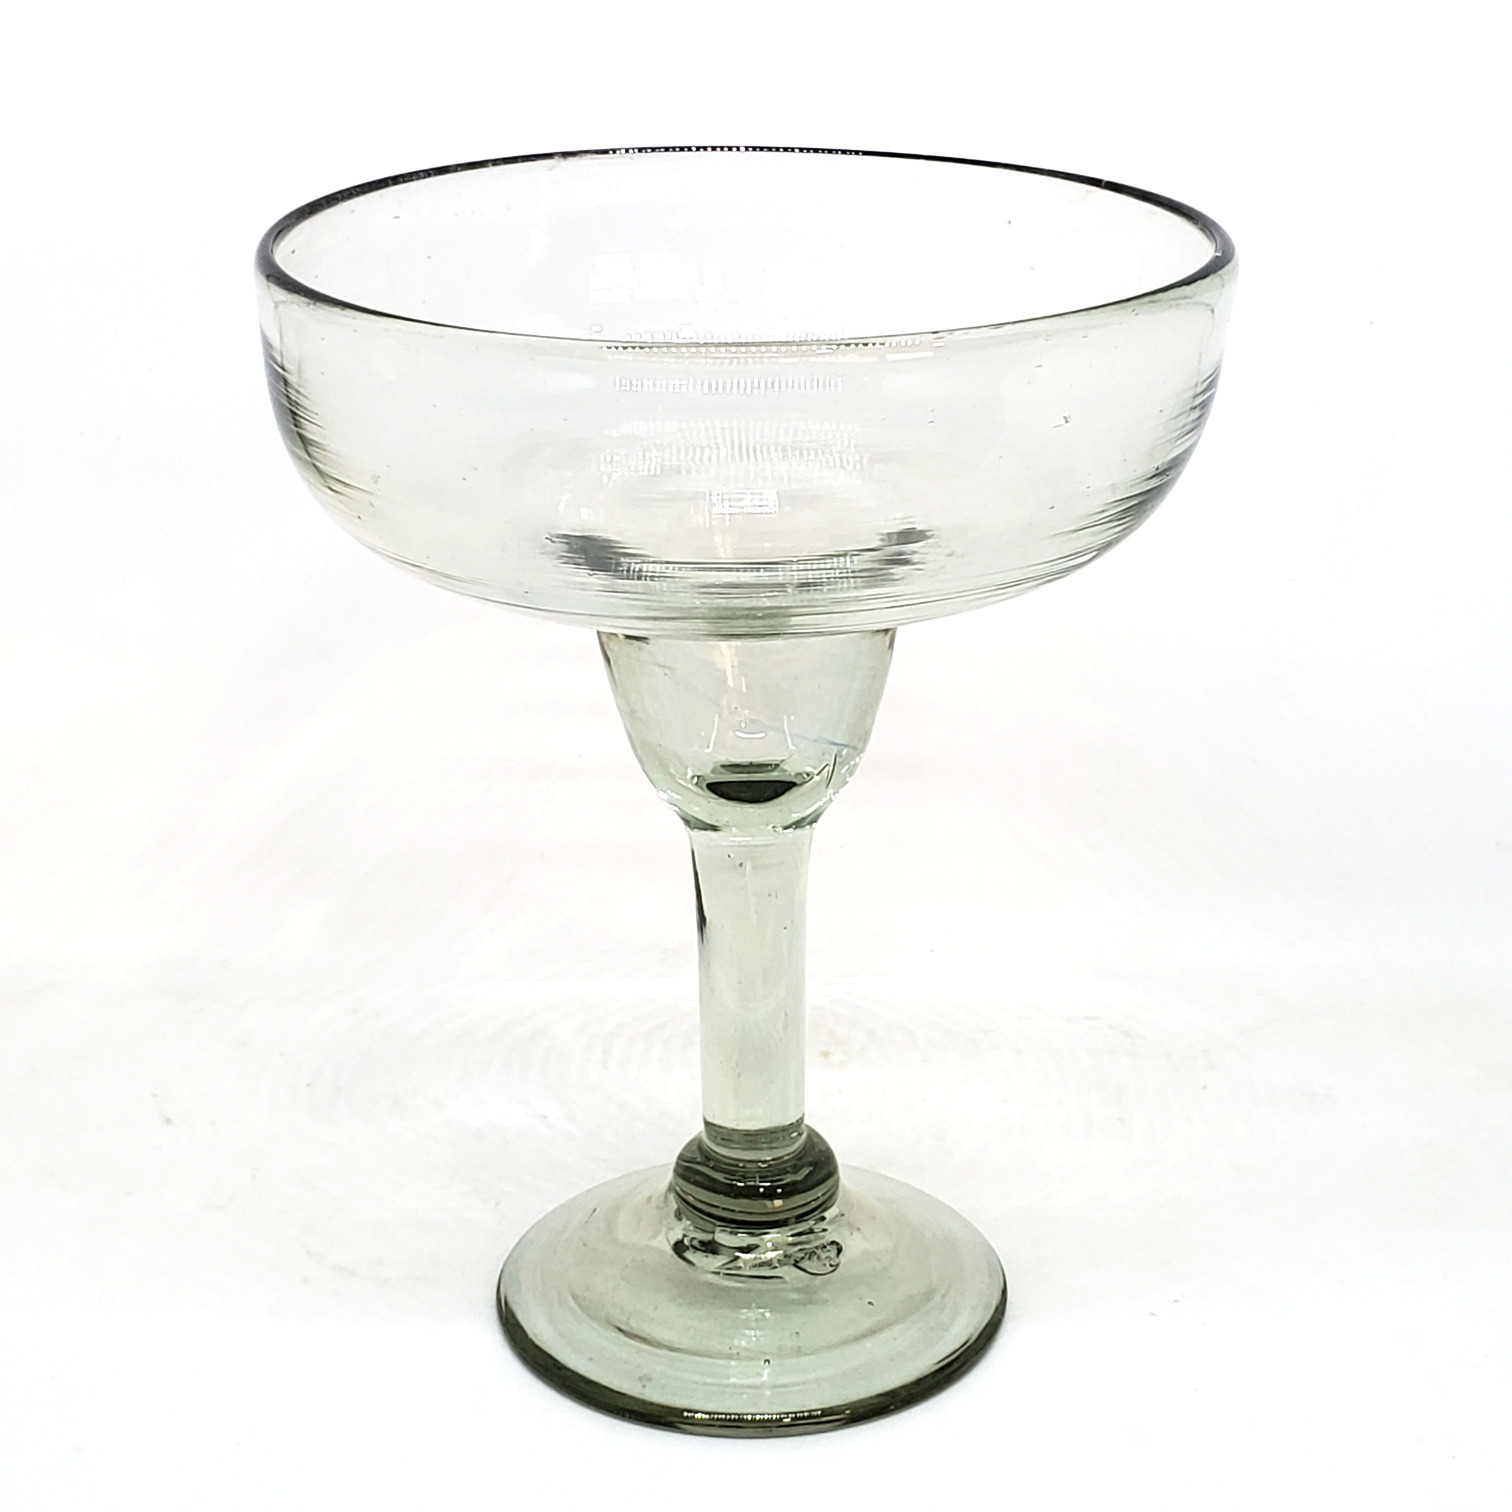 New Items / Clear Large 14 oz Margarita Glasses (set of 6) / For the margarita lover, these enjoyable large sized margarita glasses are individually hand blown and crafted.